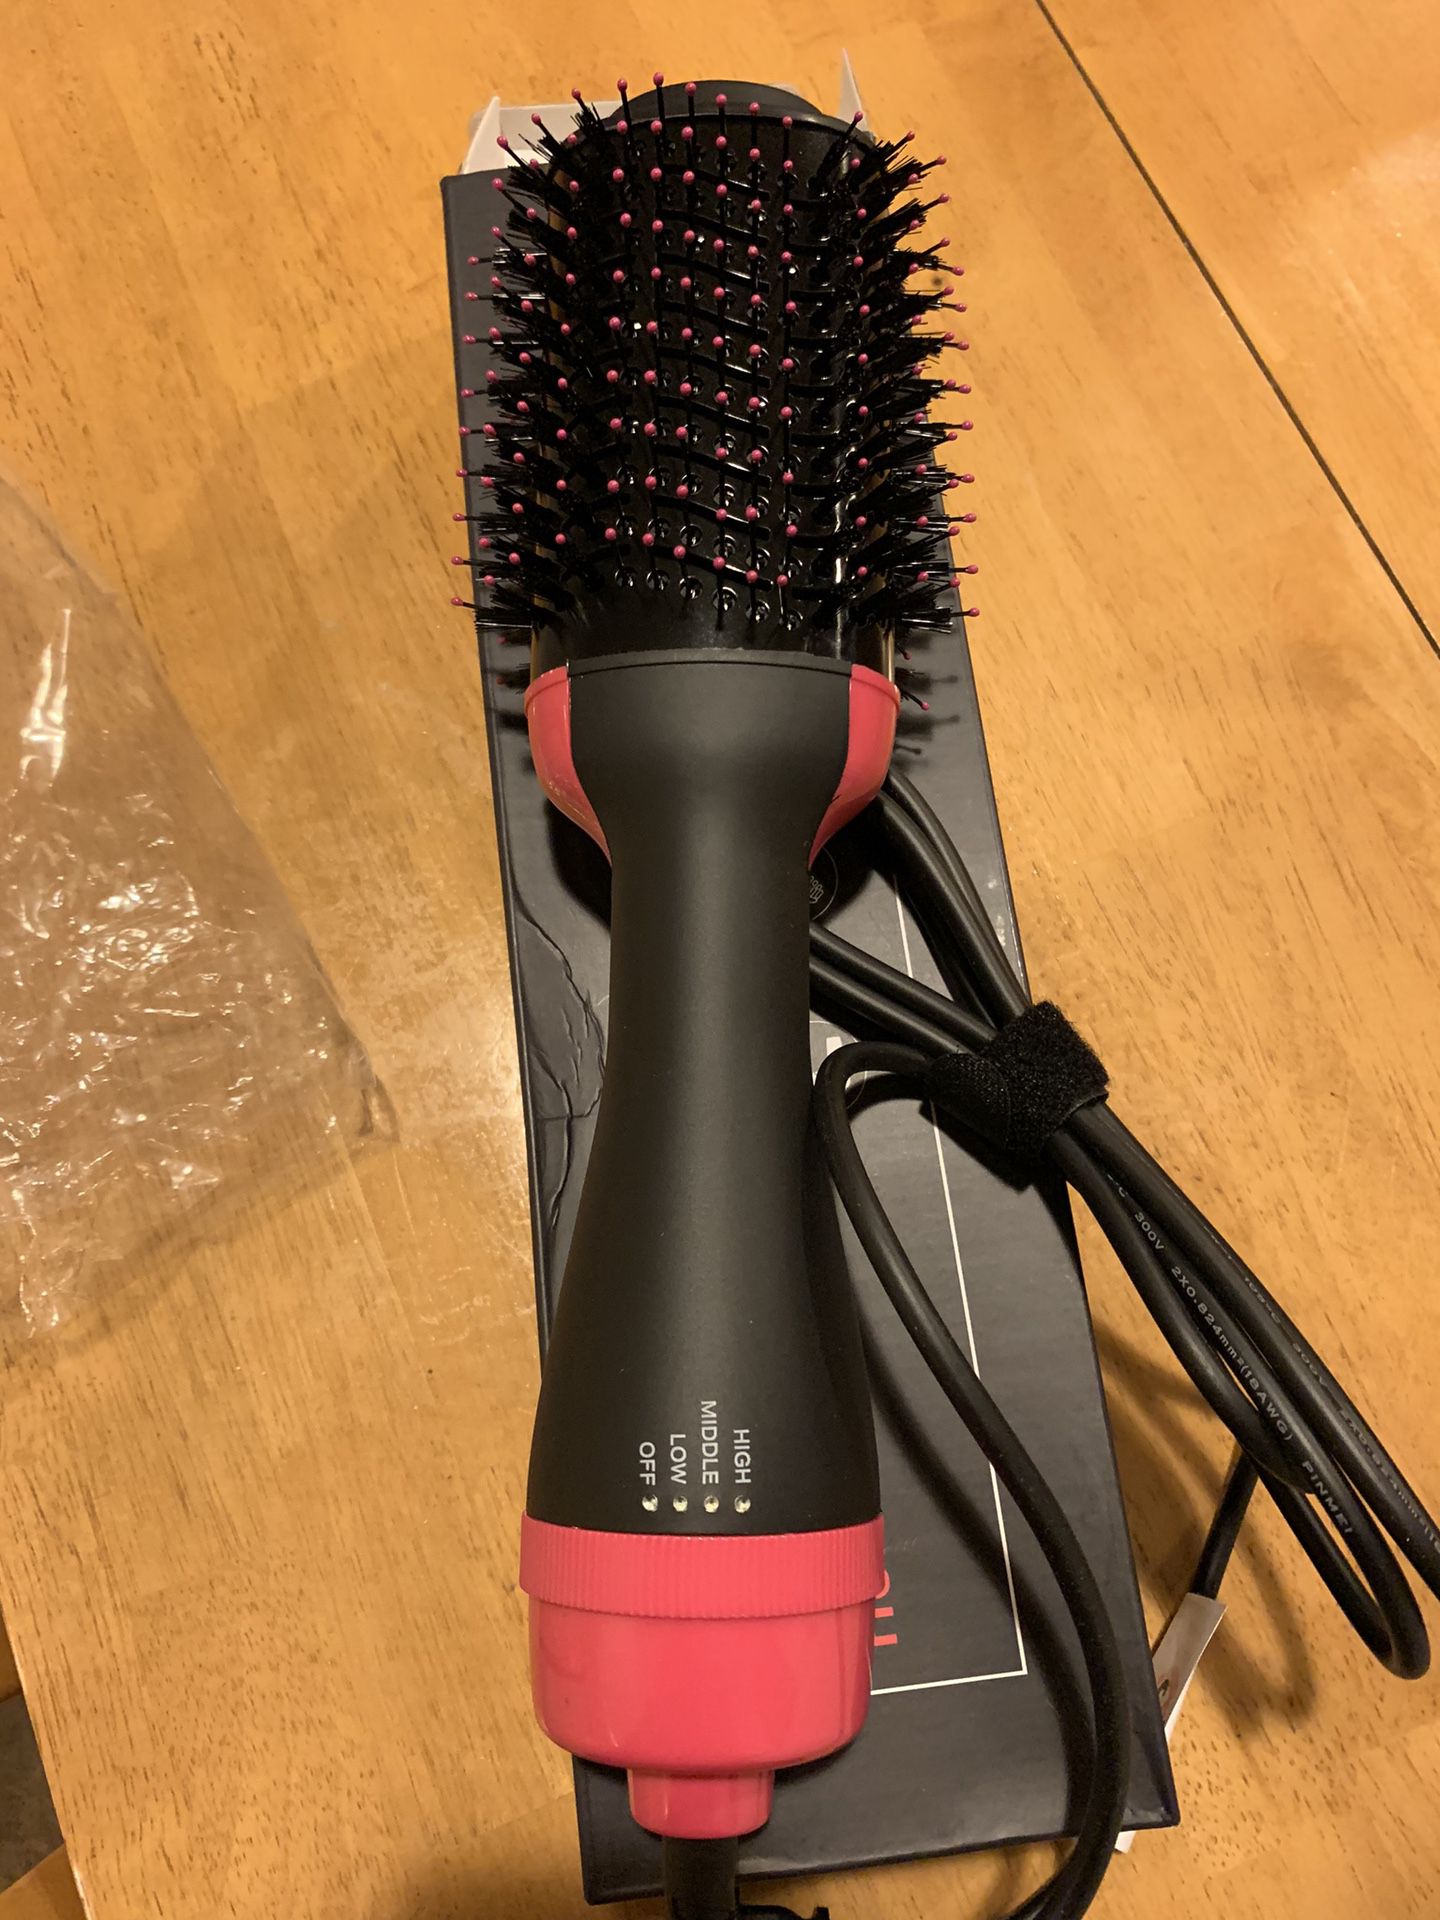 Hair Dryer Brush, 3 IN 1 Hot Air Brush with Straightening, Curling, Fast Drying, LED Indicator, 3 Settings, Painless One Step Hair Dryer & Volumizer